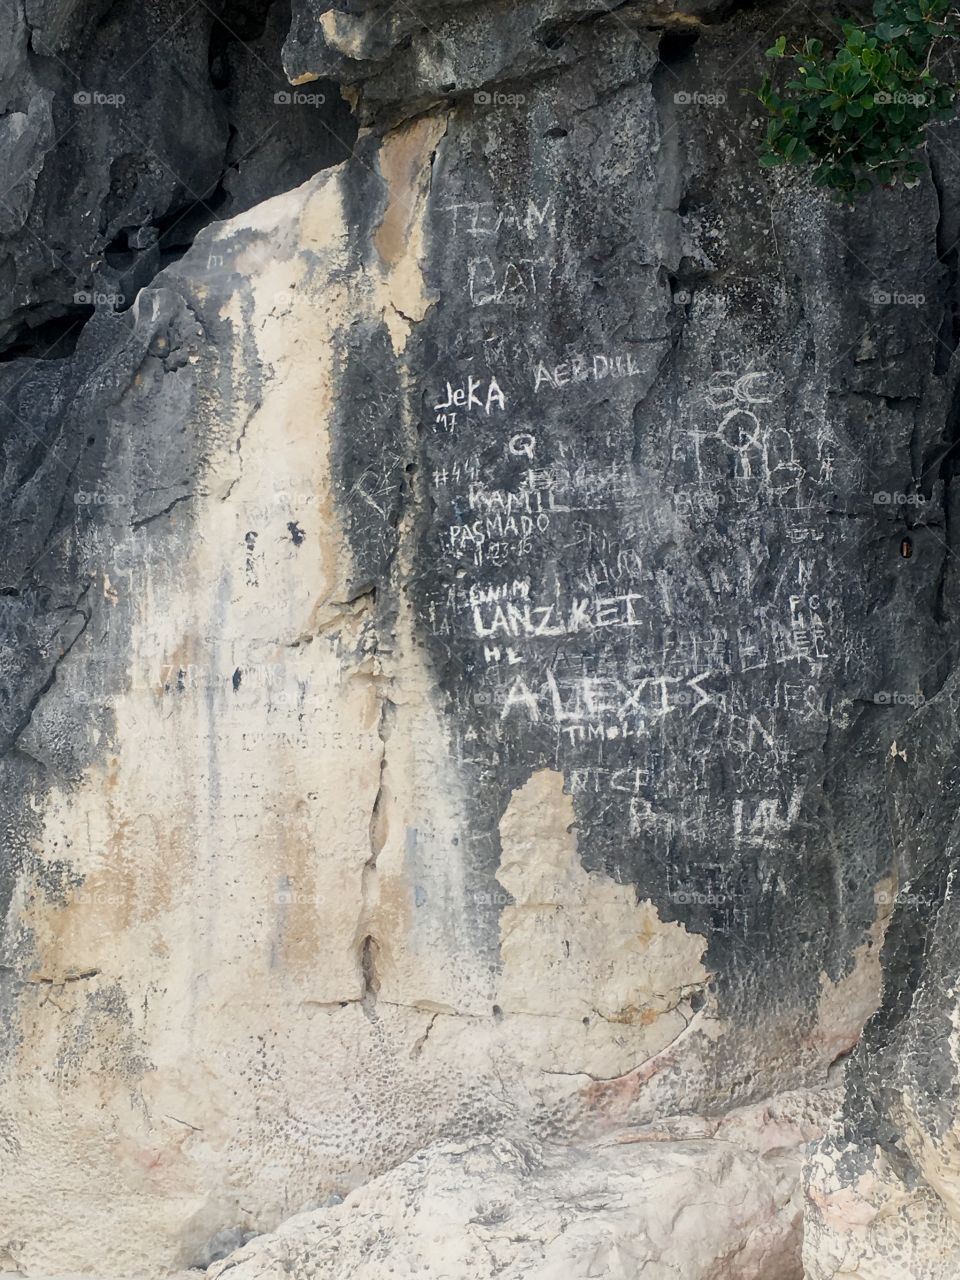 Names carved into the side of a rock 